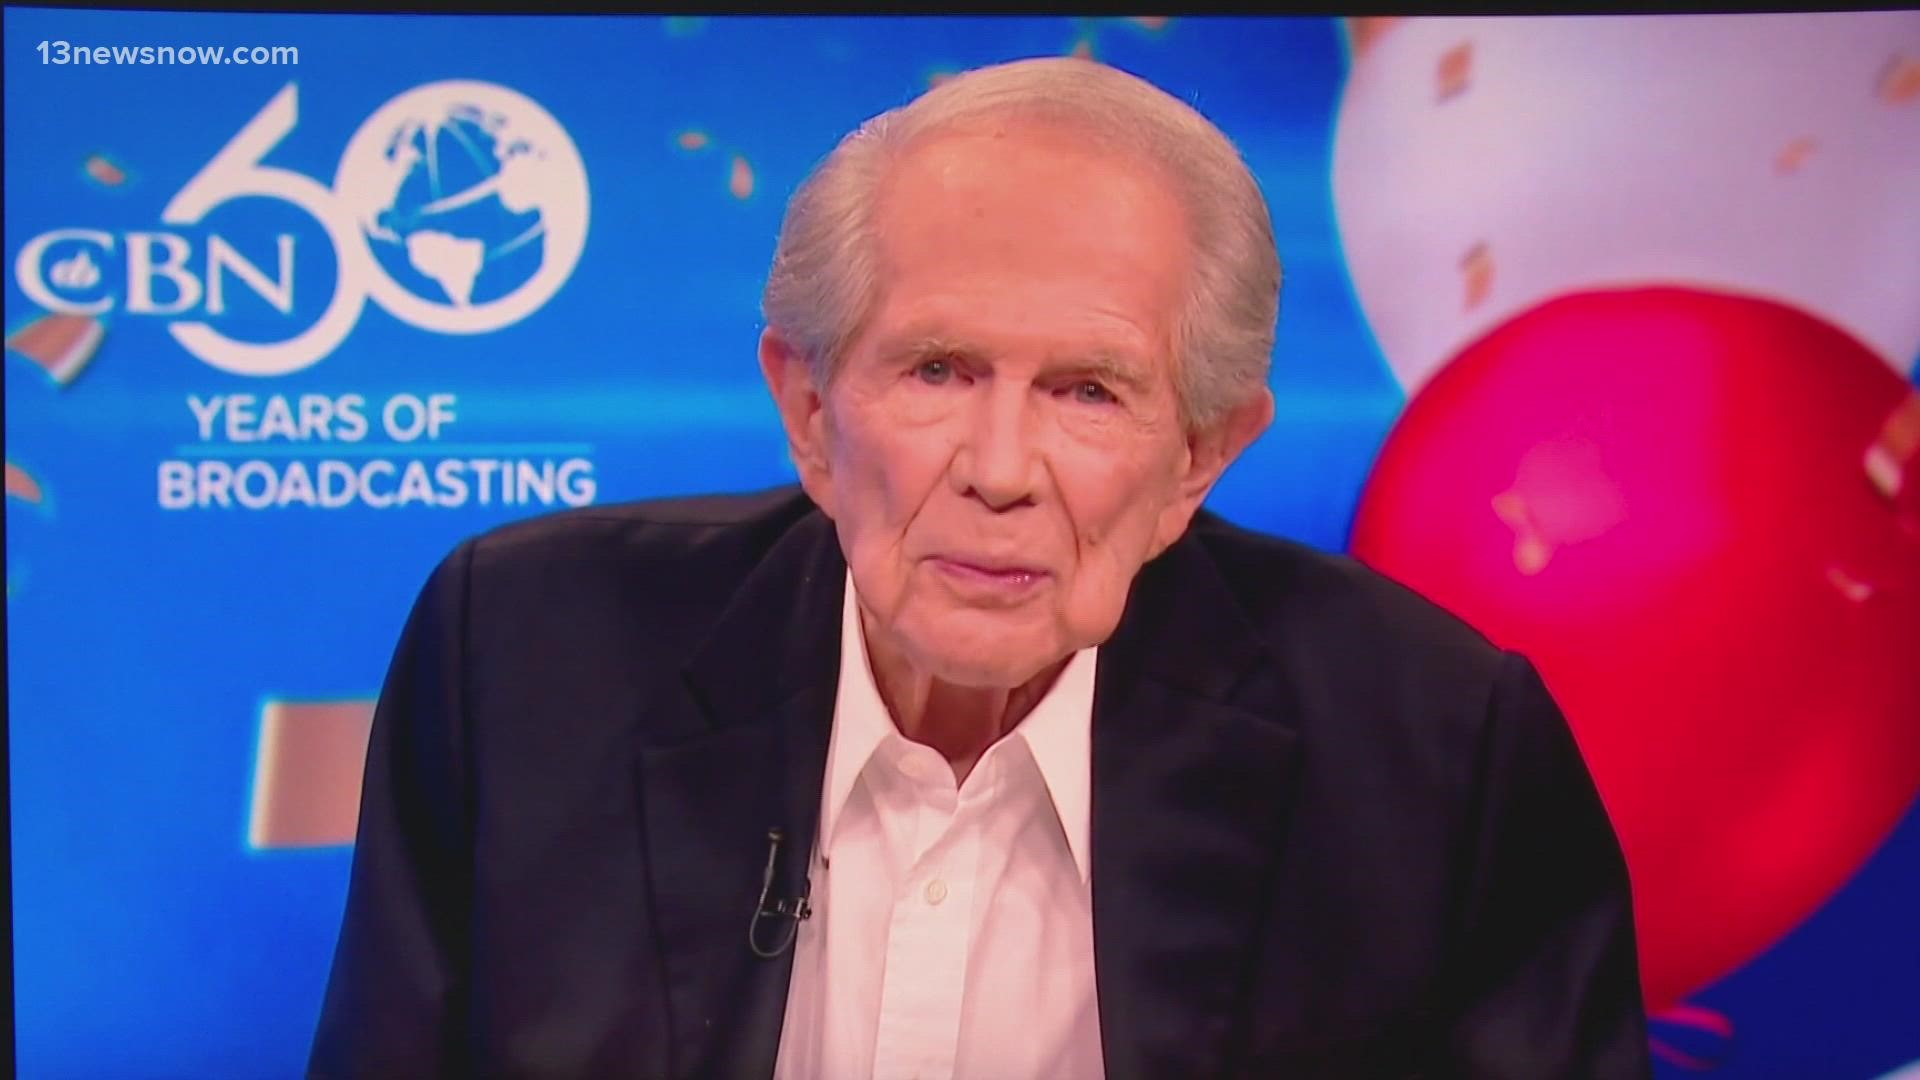 Pat Robertson steps down from hosting The 700 Club on CBN 